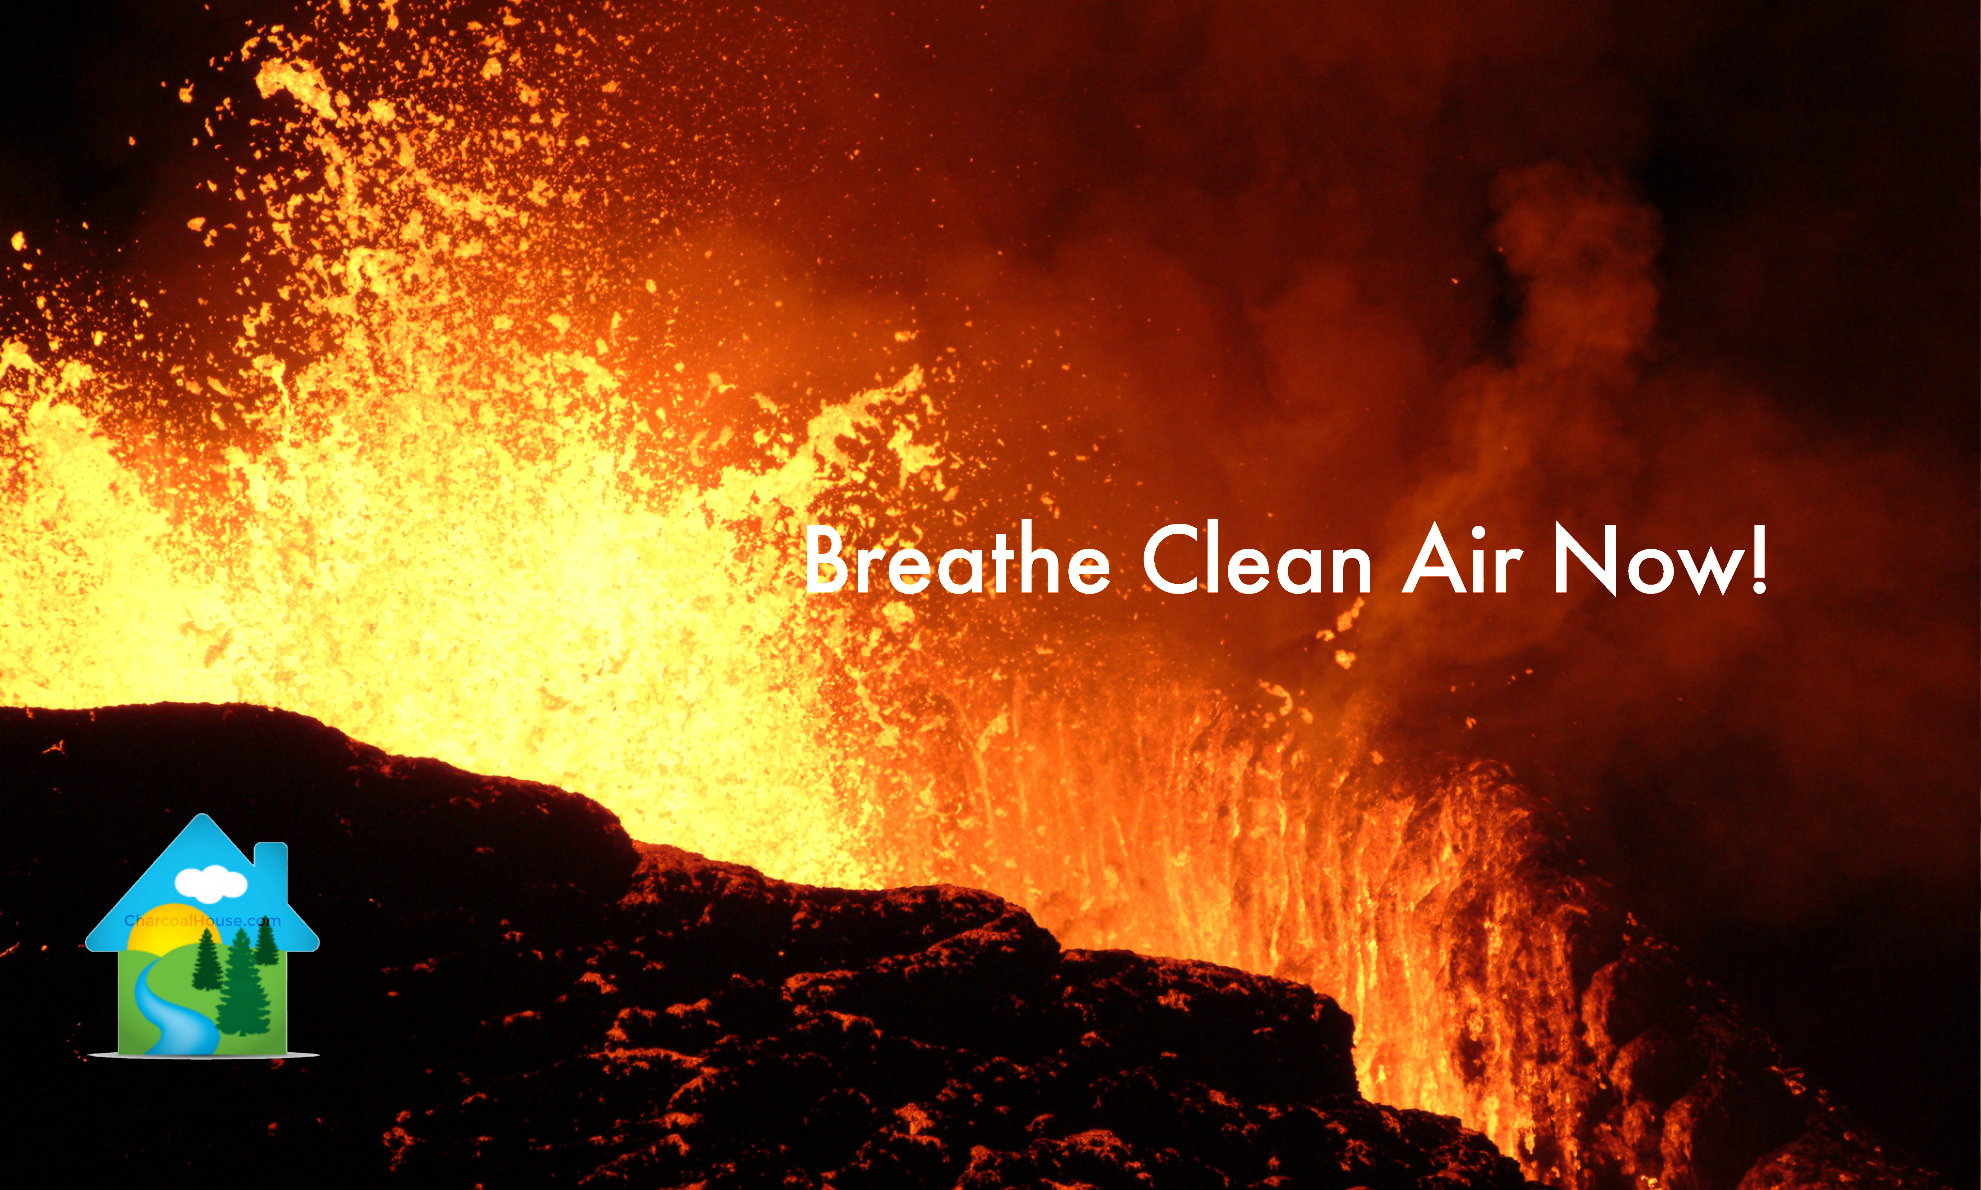 breathe clean air - Protection From Volcanic Ash, Breathe Clean Air Now!